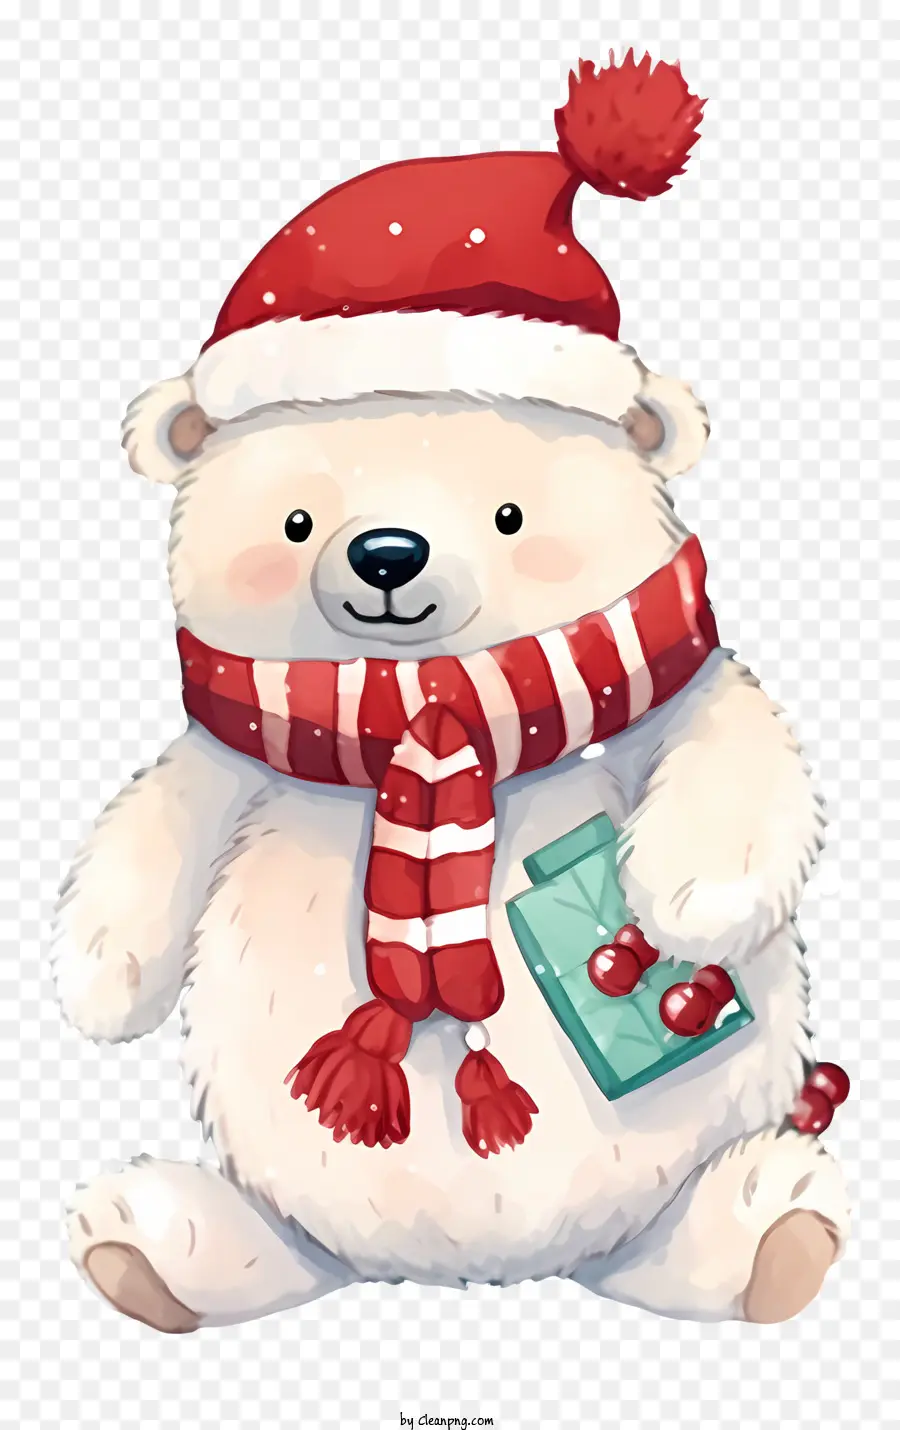 polar bear red and white striped scarf red and white striped cap red and white striped hat red and white striped necktie